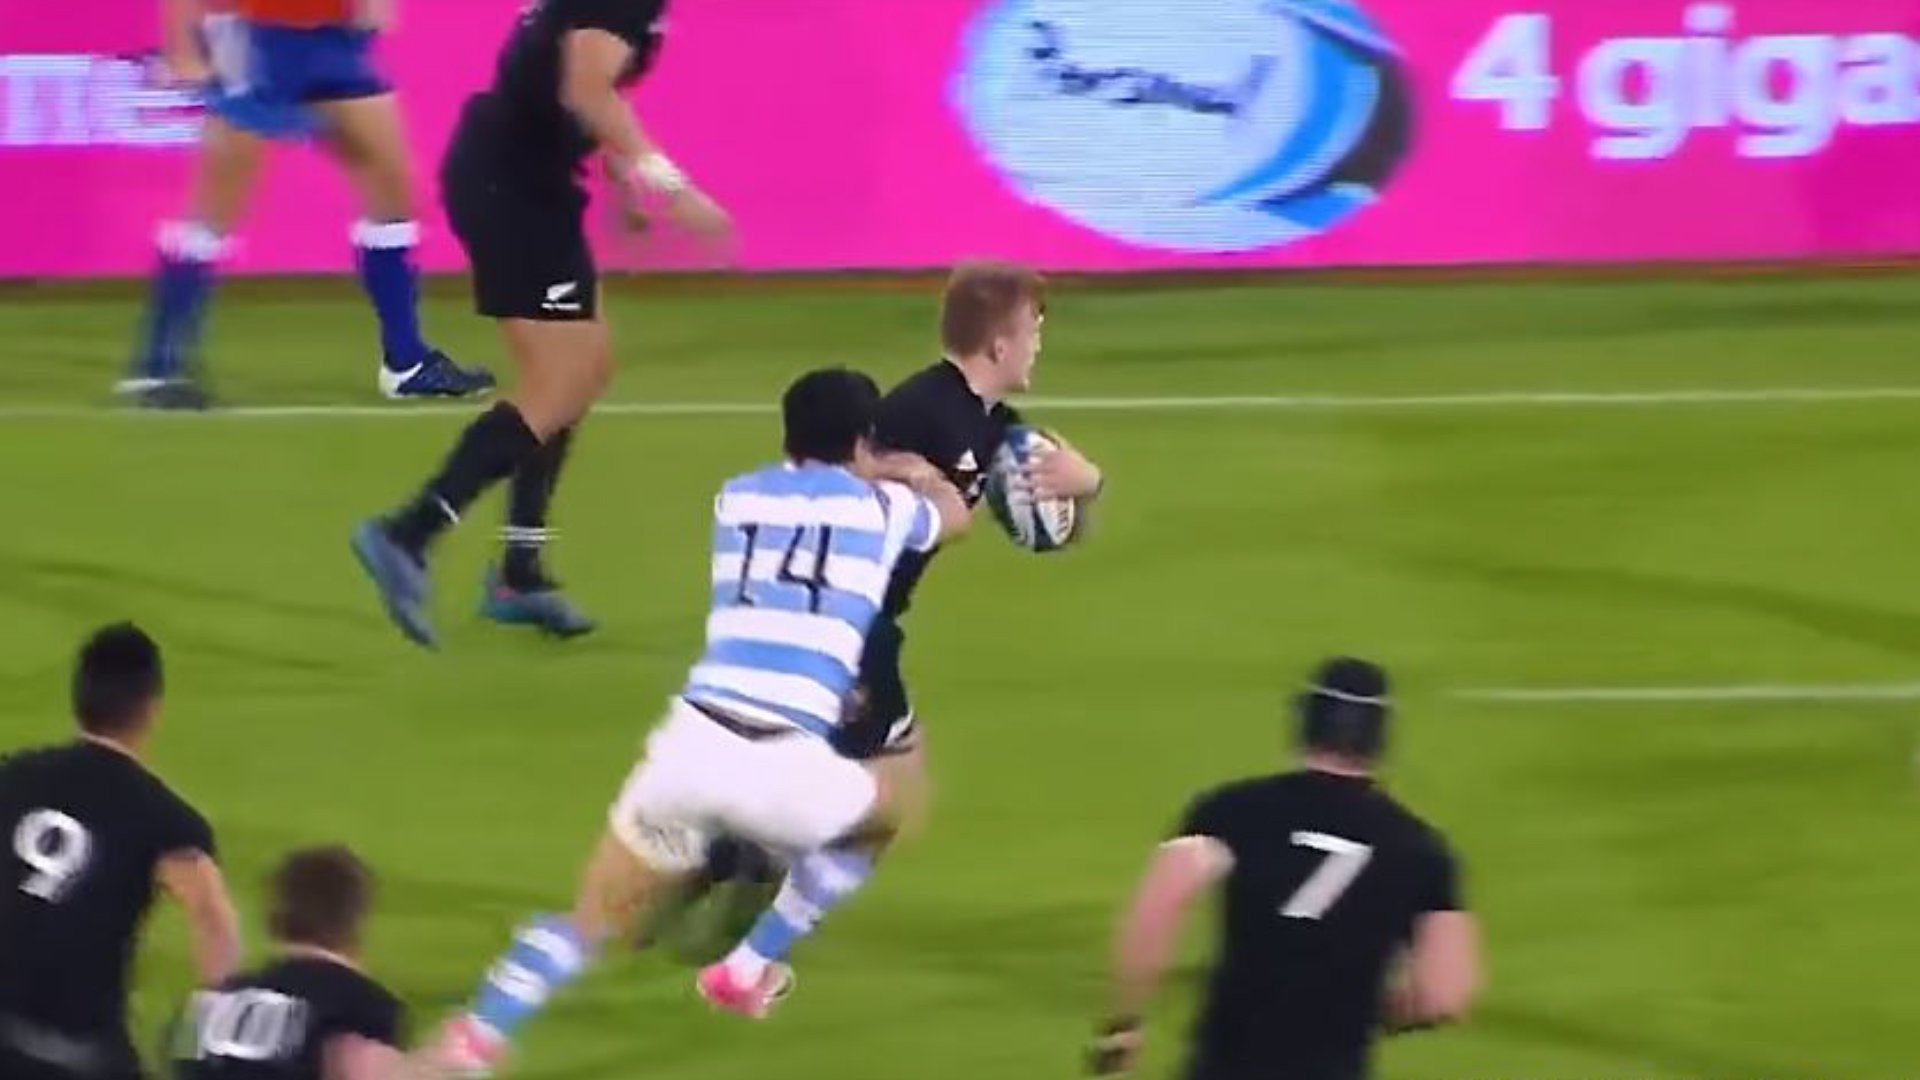 WATCH: Damian McKenzie playing on easy-mode against Argentina